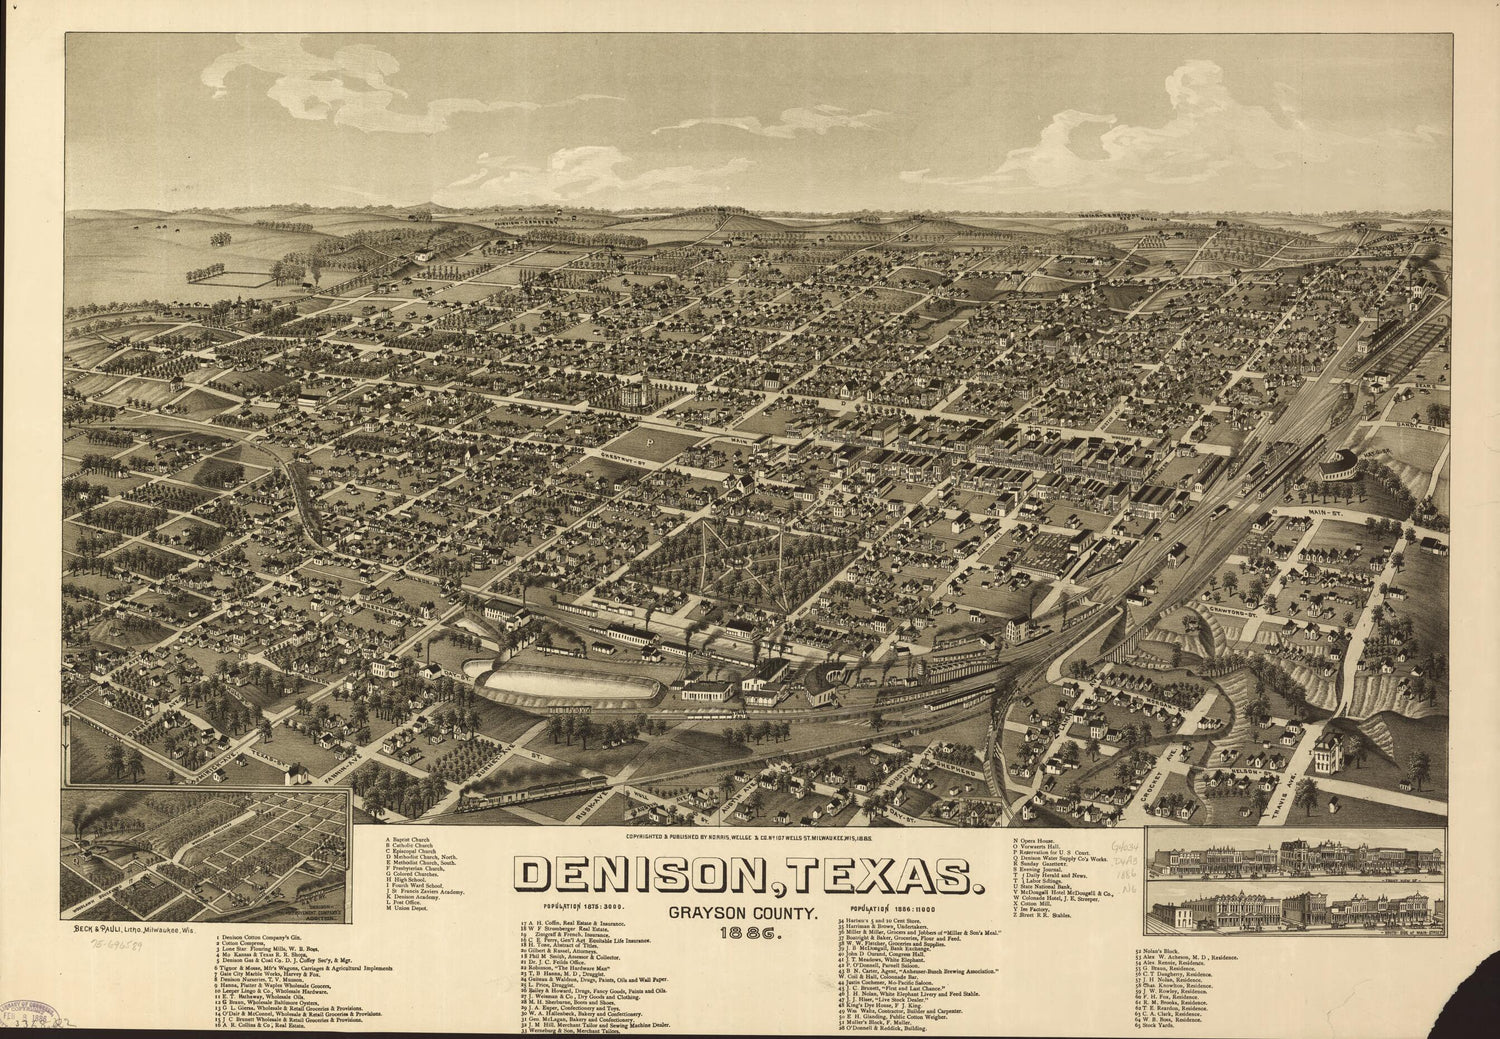 This old map of Denison, Texas, Grayson County from 1886 was created by  Beck &amp; Pauli, Wellge &amp; Co Norris in 1886